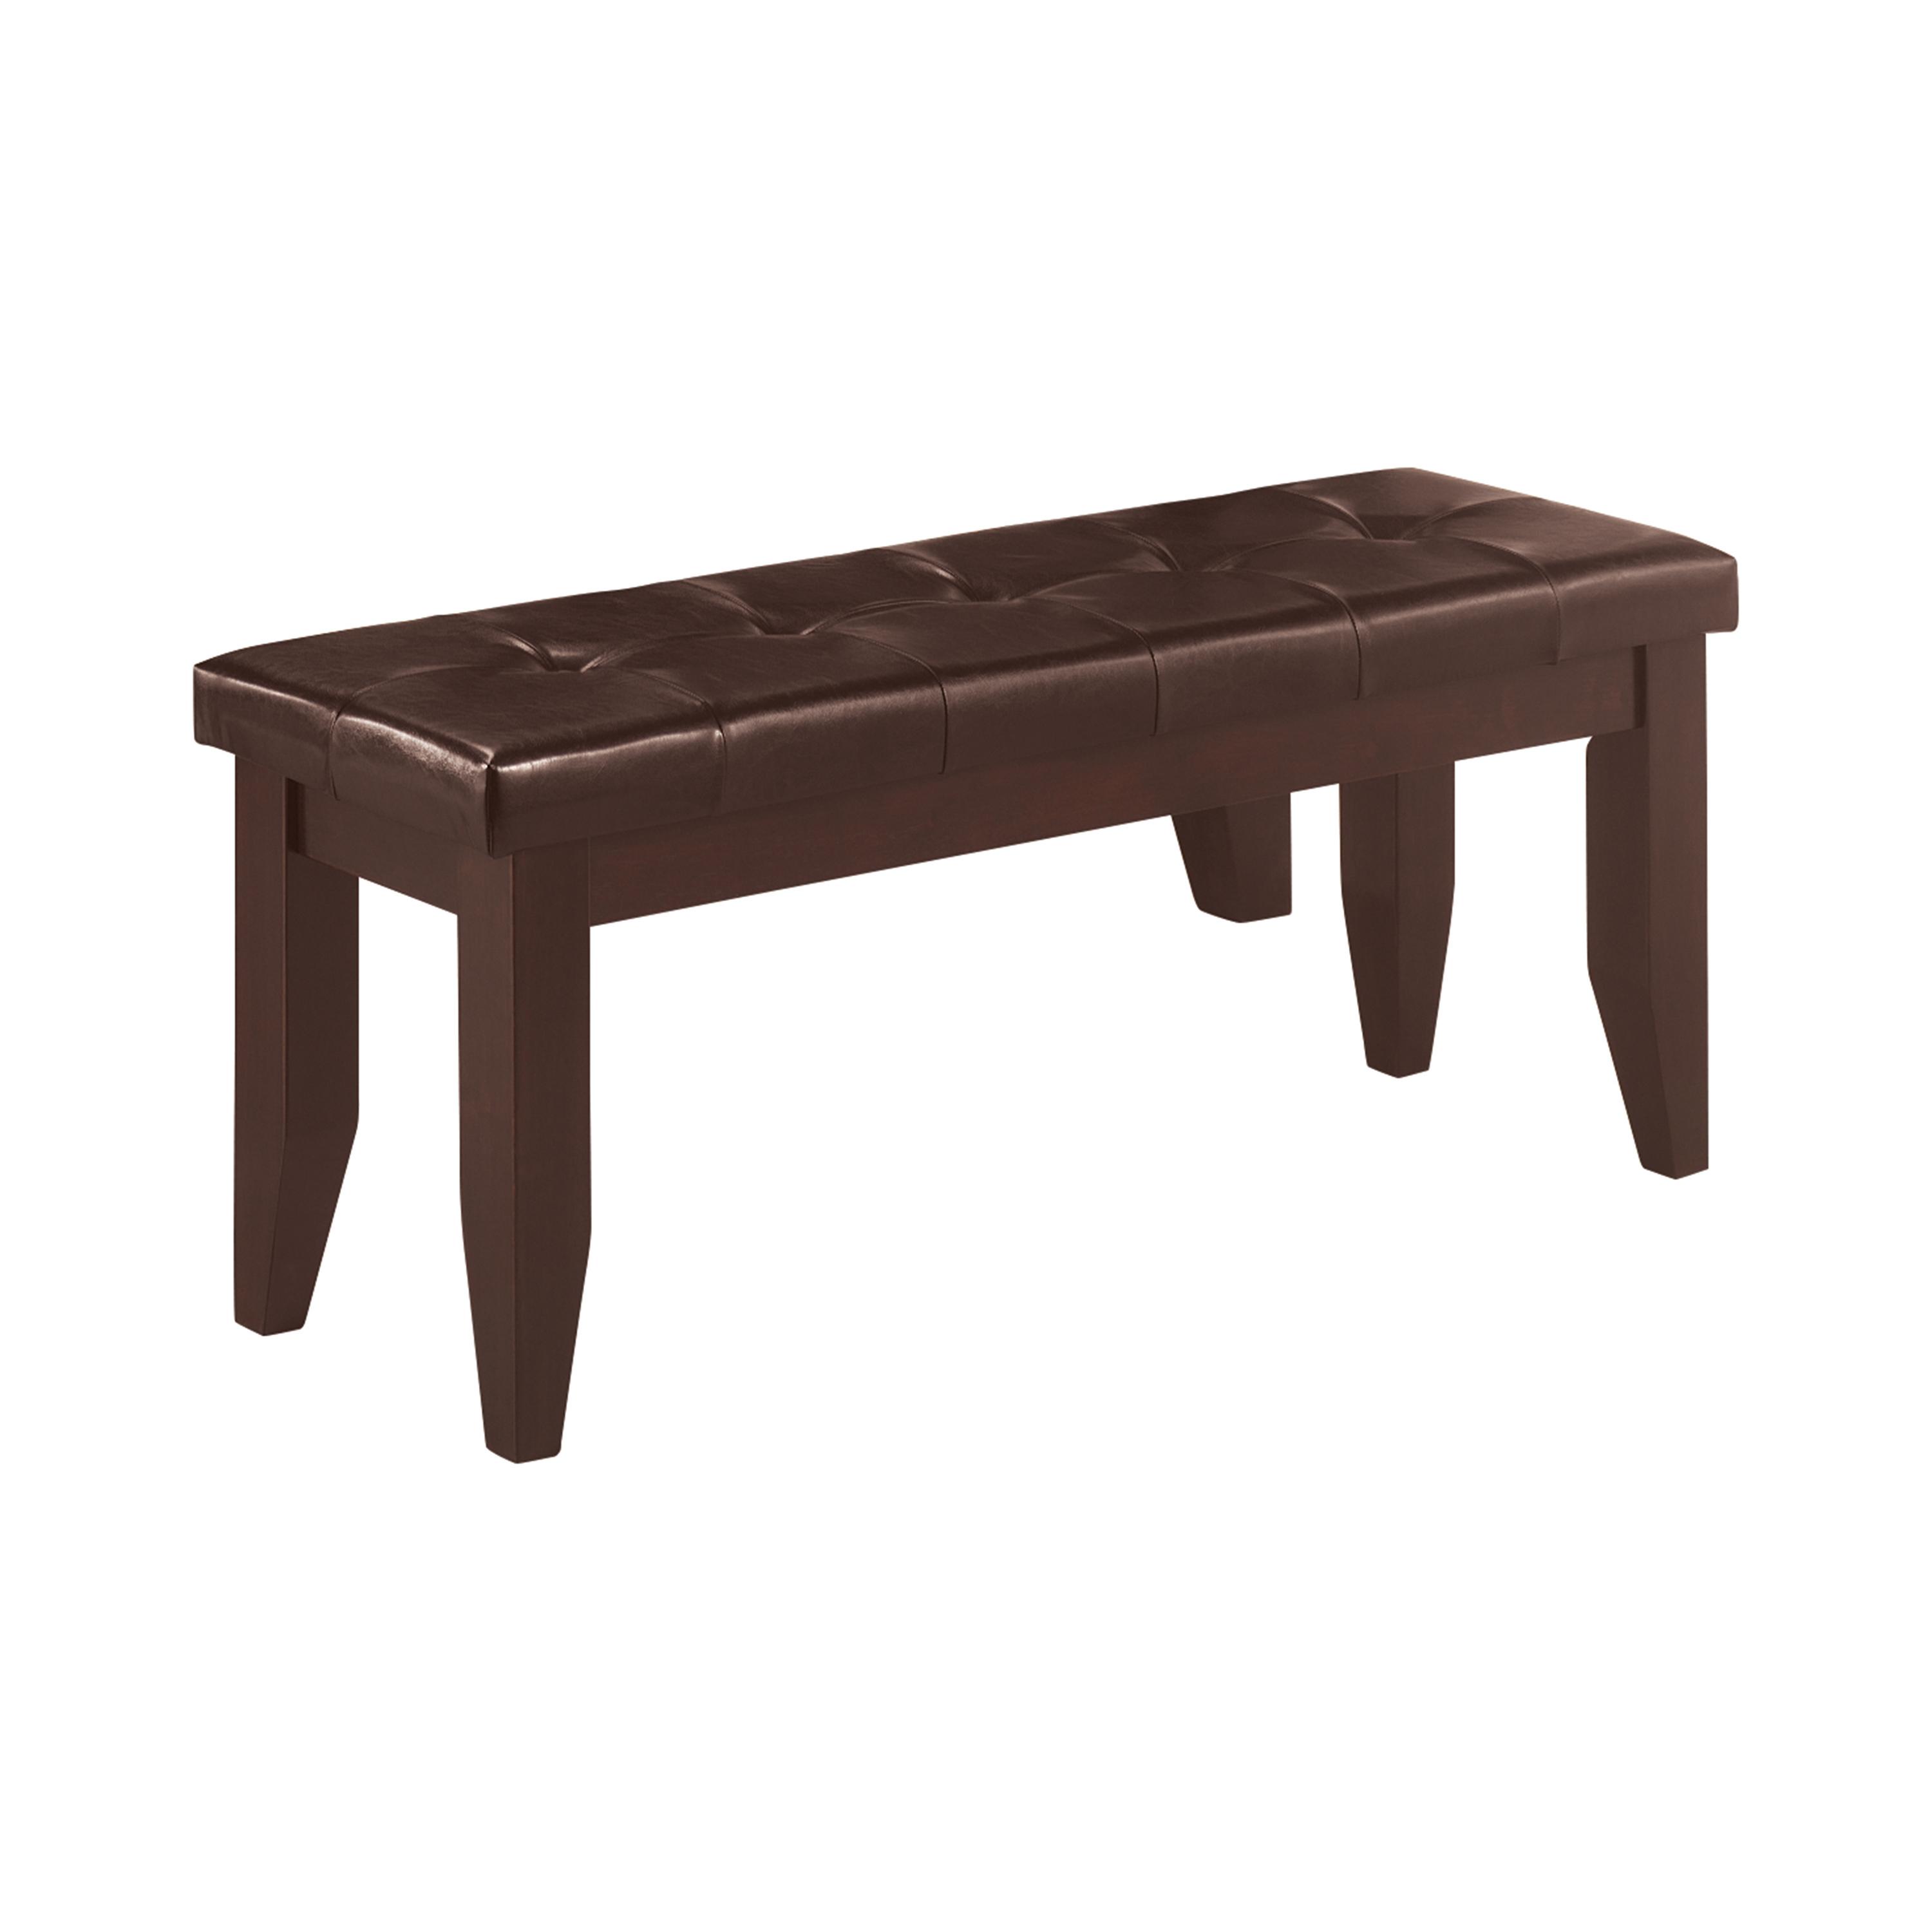 Modern Dining Bench 102723 Dalila 102723 in Cappuccino Leatherette